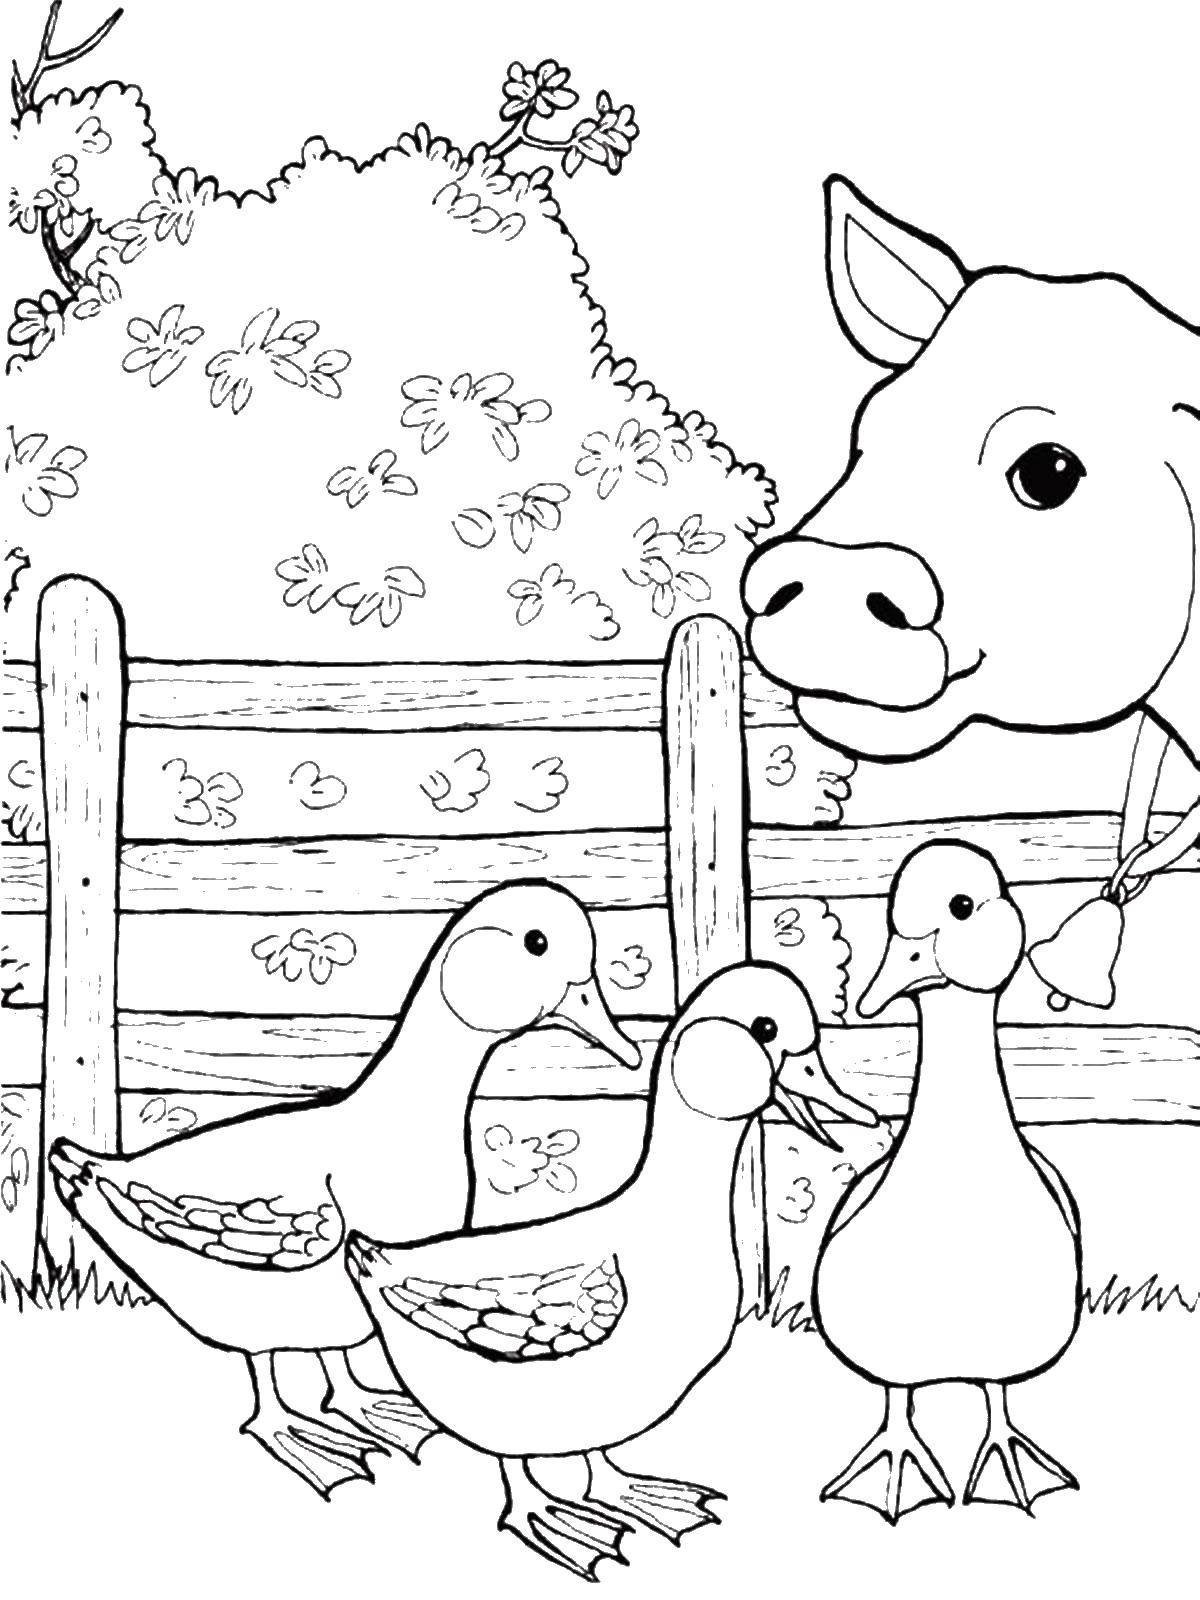 Coloring Gosatti and ladybug. Category Pets allowed. Tags:  Animals, cow.